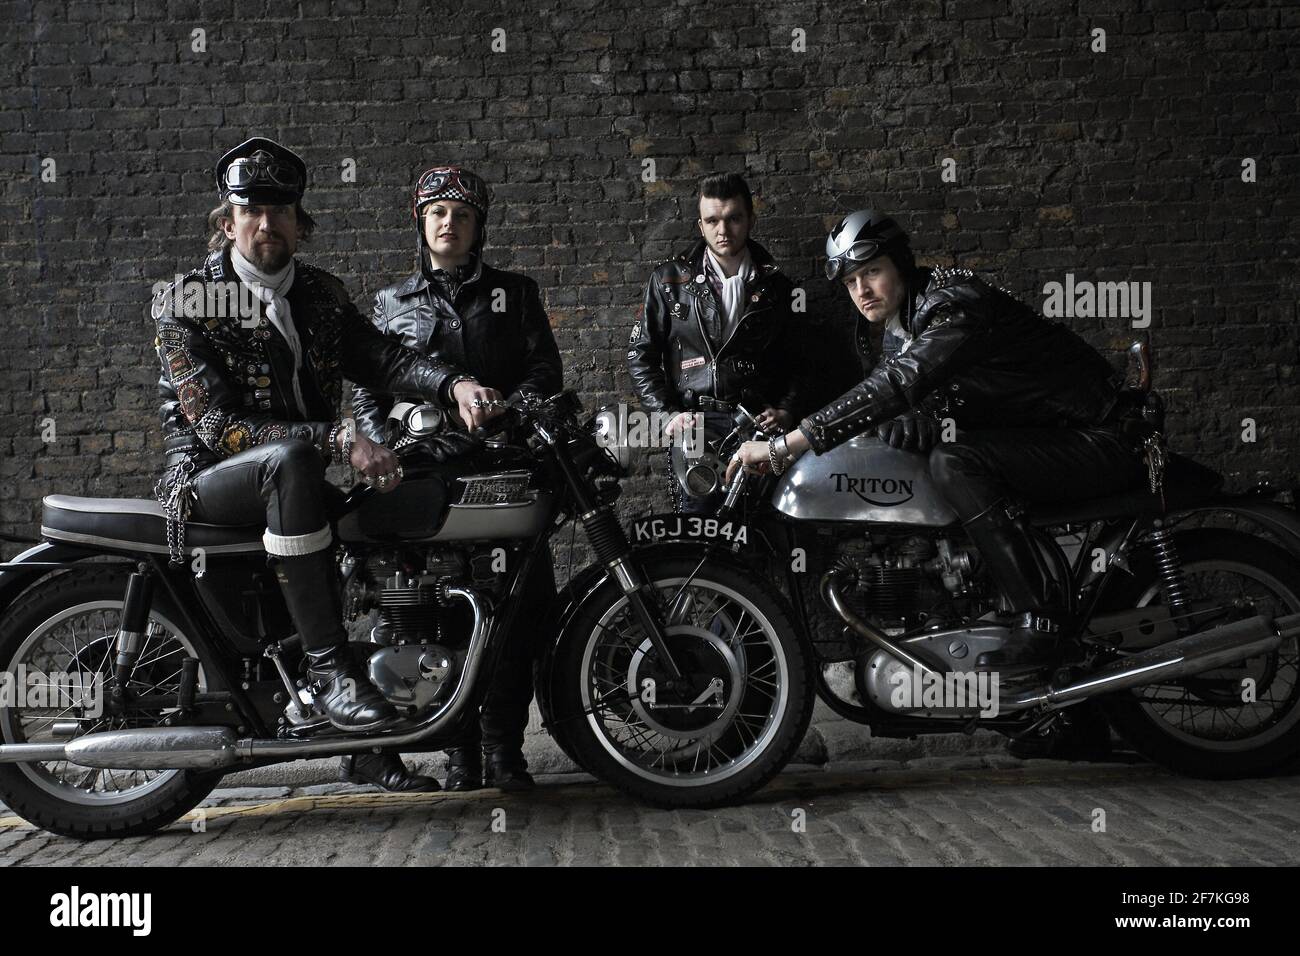 Rocker gang posing with British classic Triumph,Triton motorcycles . Rockers on classic cafe racer motorcycles in London , UK. Stock Photo